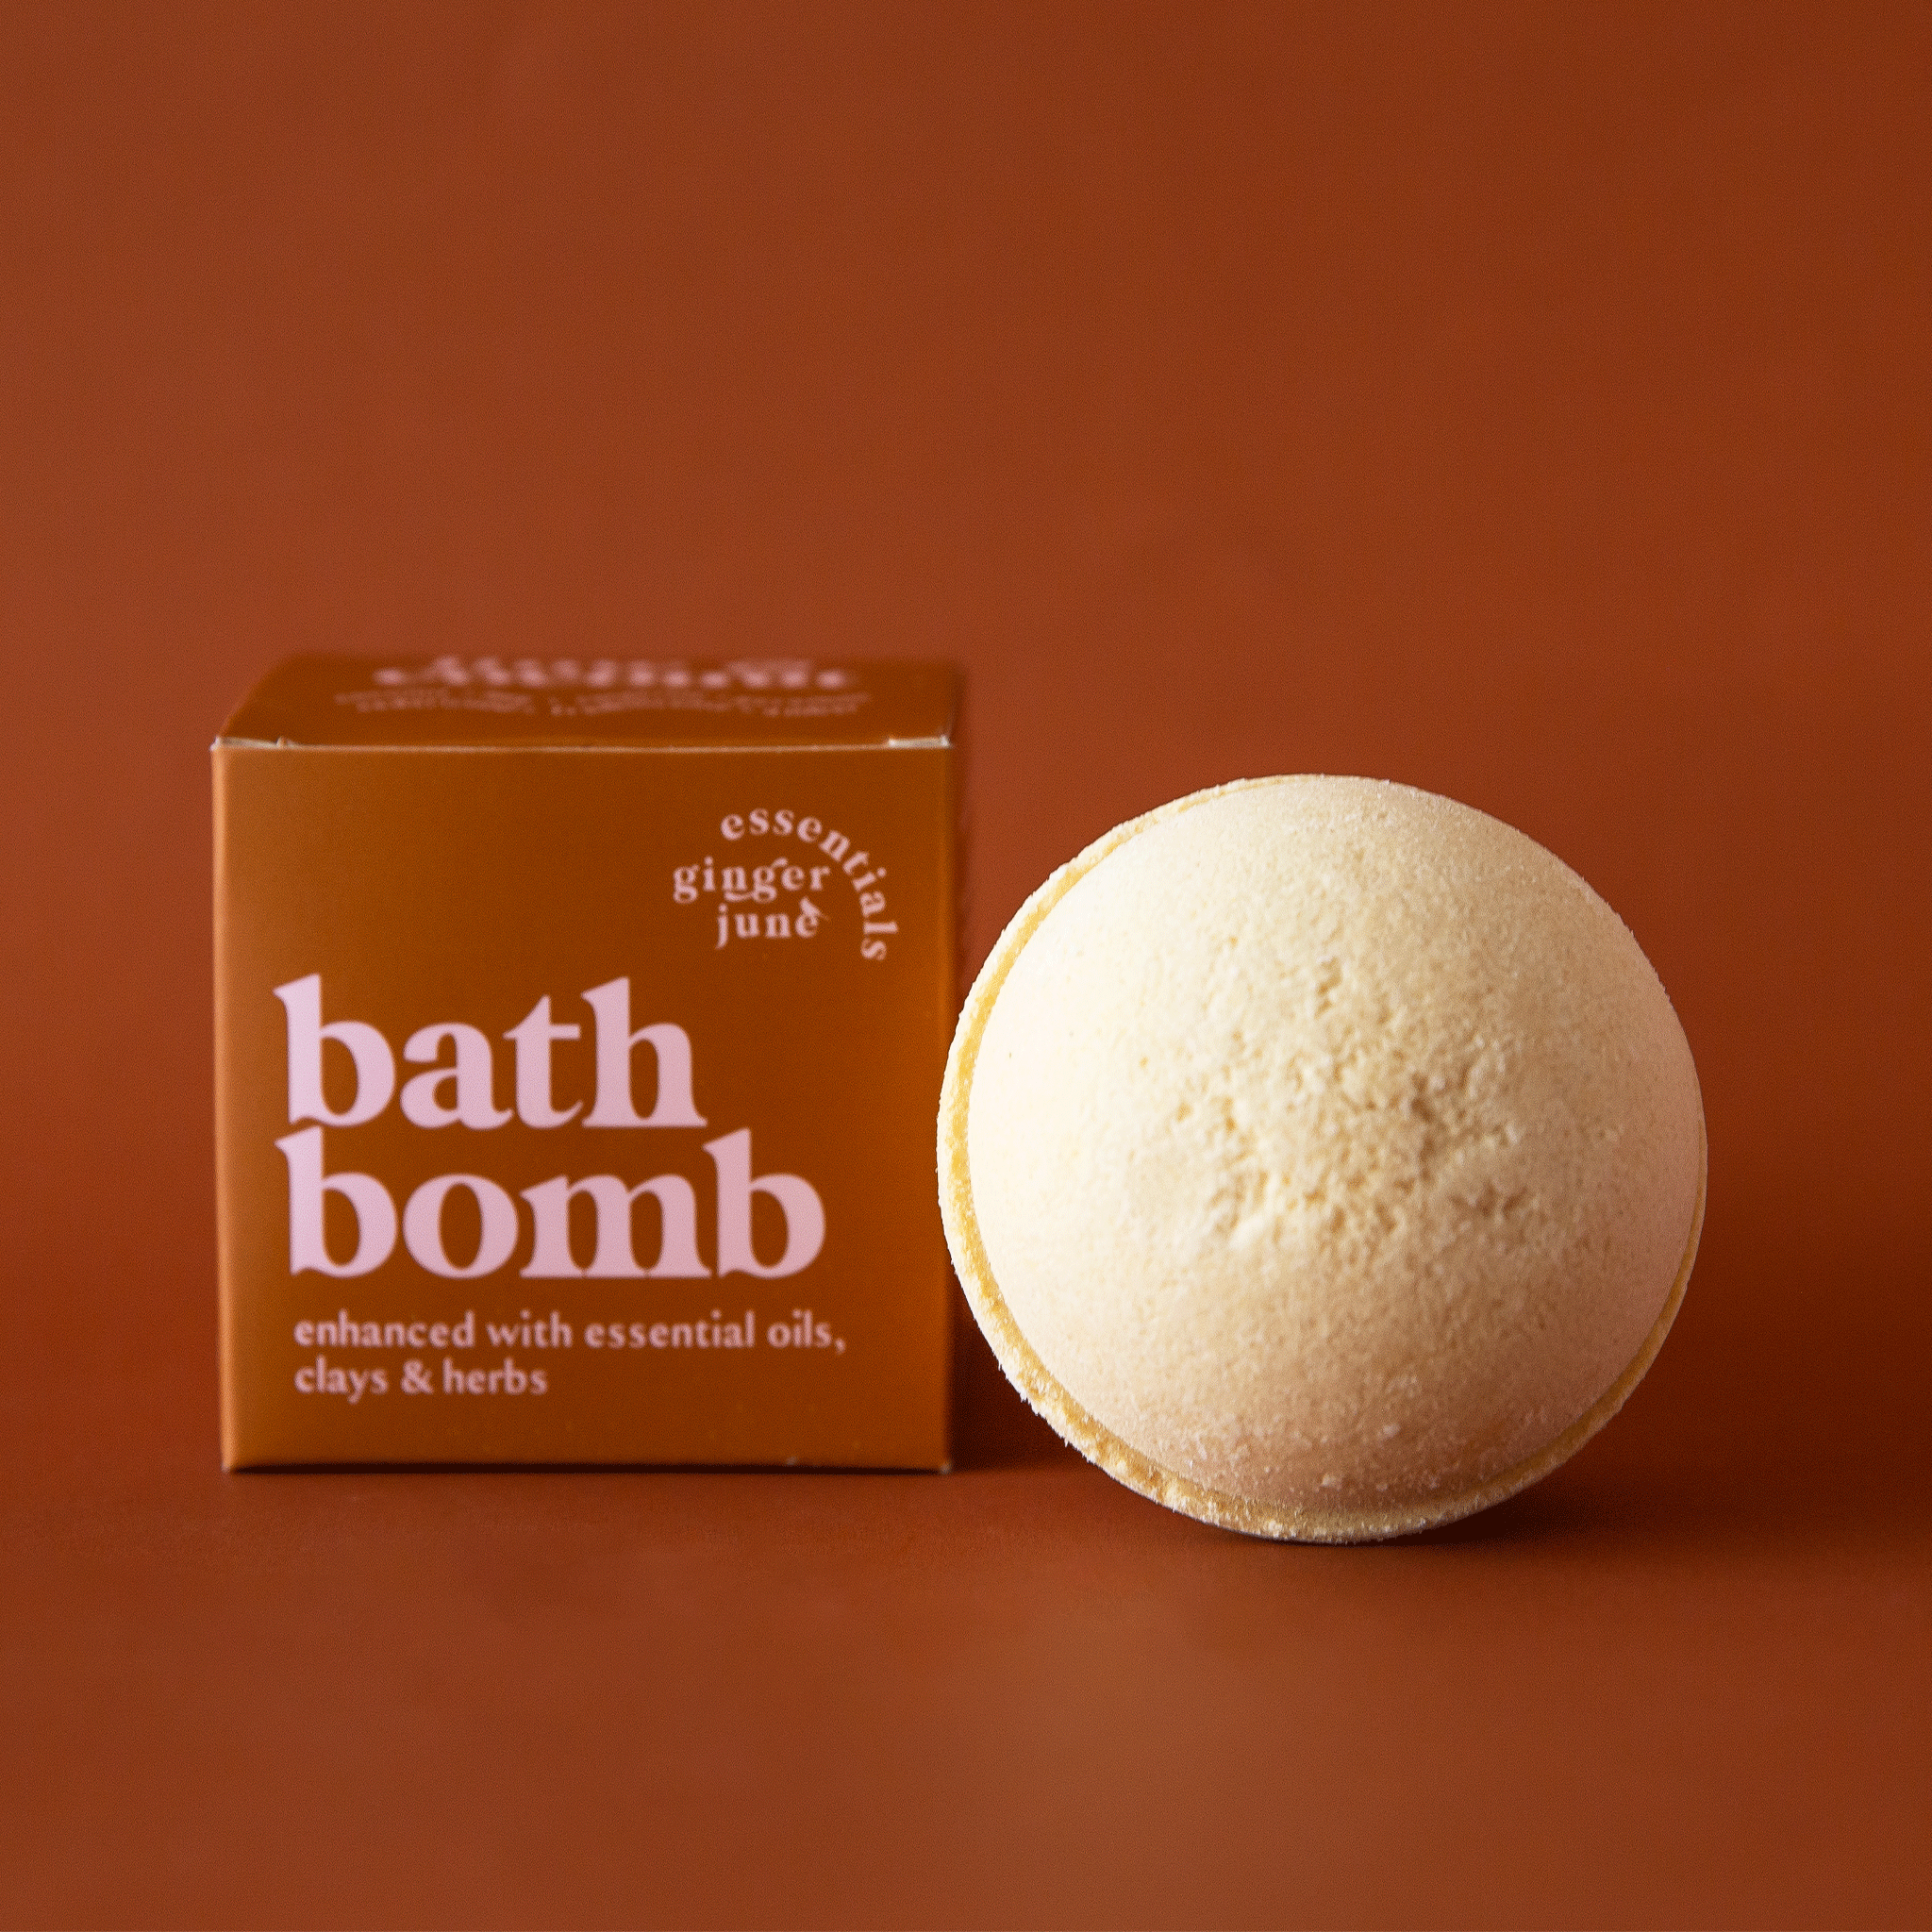 On a brown background is a warm brown box with a tan bath bomb next to it. The text on the box reads, "bath bomb enhanced with essential oils, clays and herbs".